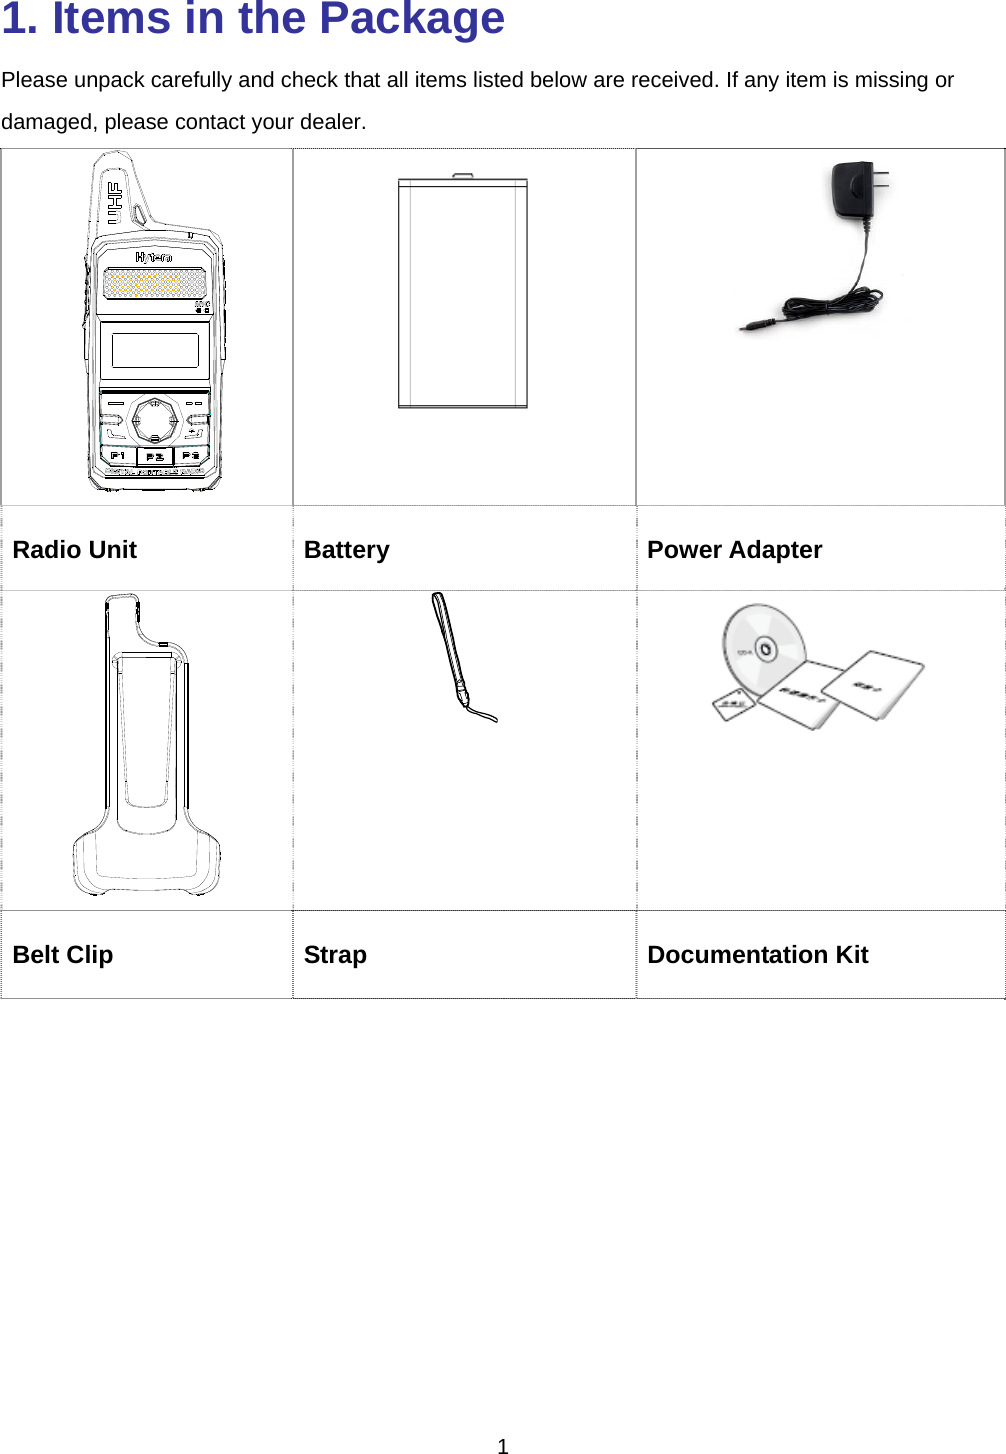  1  1. Items in the Package Please unpack carefully and check that all items listed below are received. If any item is missing or damaged, please contact your dealer.      Radio Unit  Battery  Power Adapter    Belt Clip  Strap  Documentation Kit  